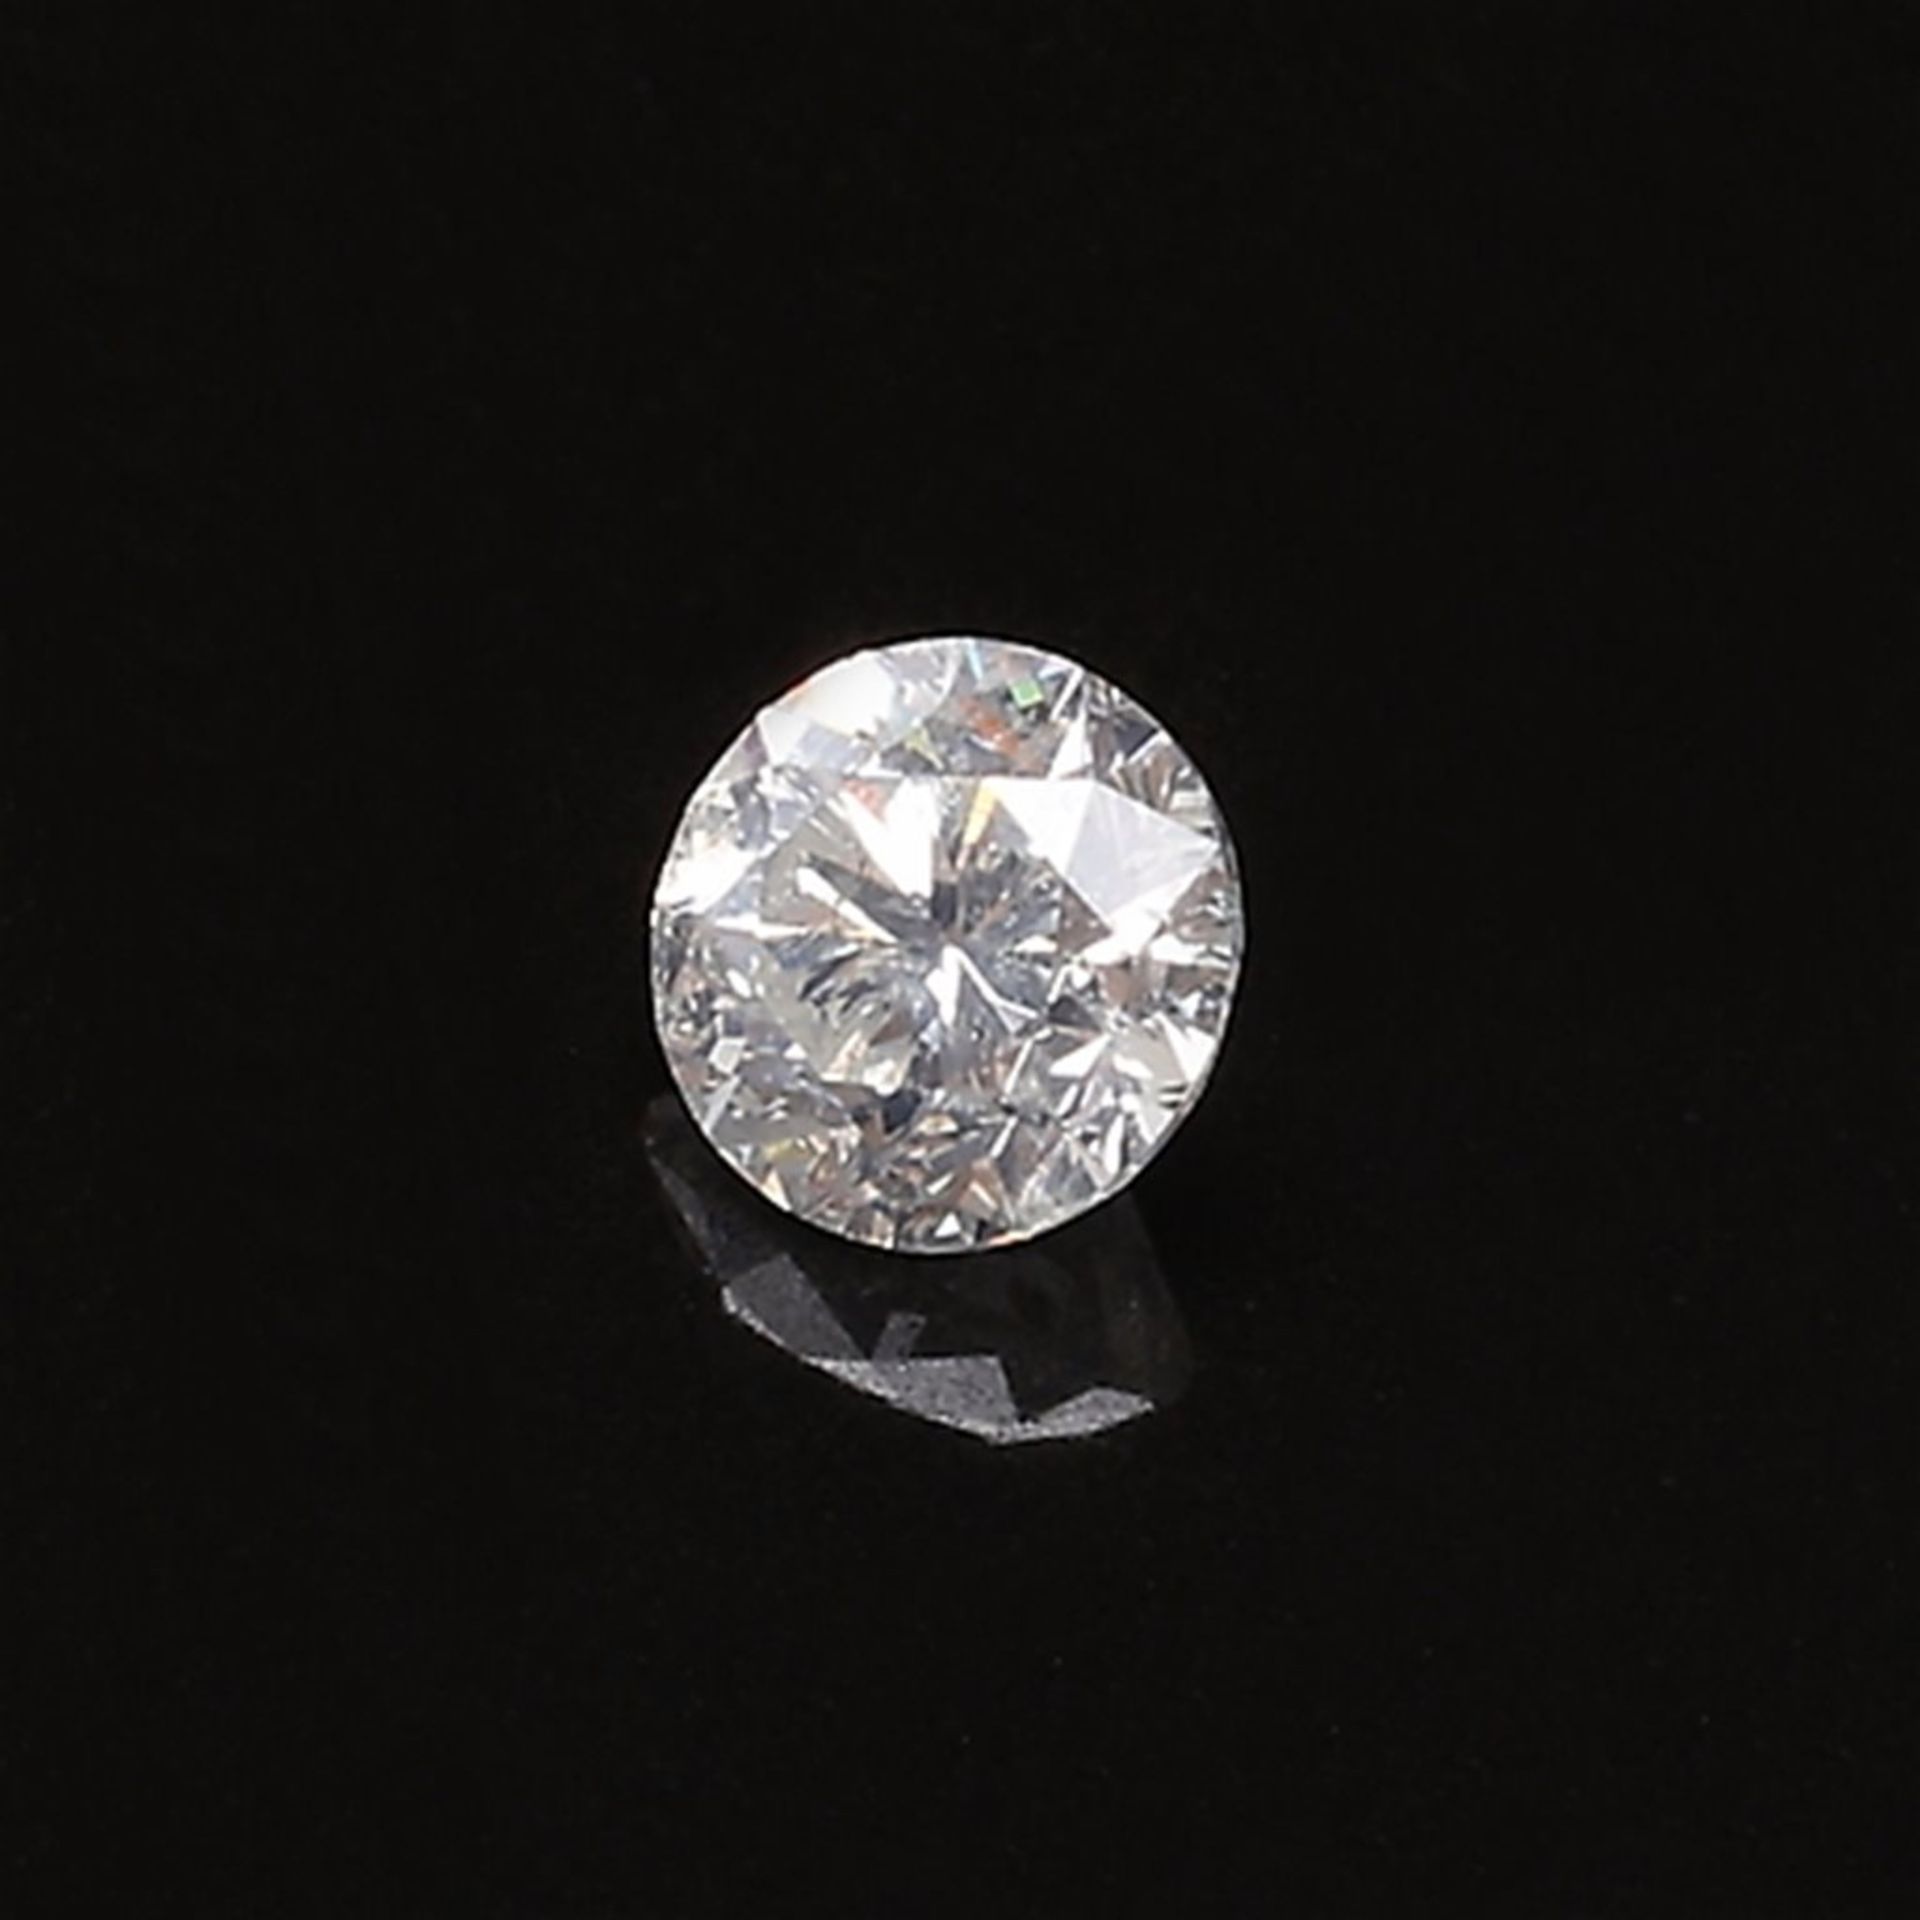 Round brilliant cut diamond, 1.35 ct Color F Clarity I2 Certificate from GIA included with number